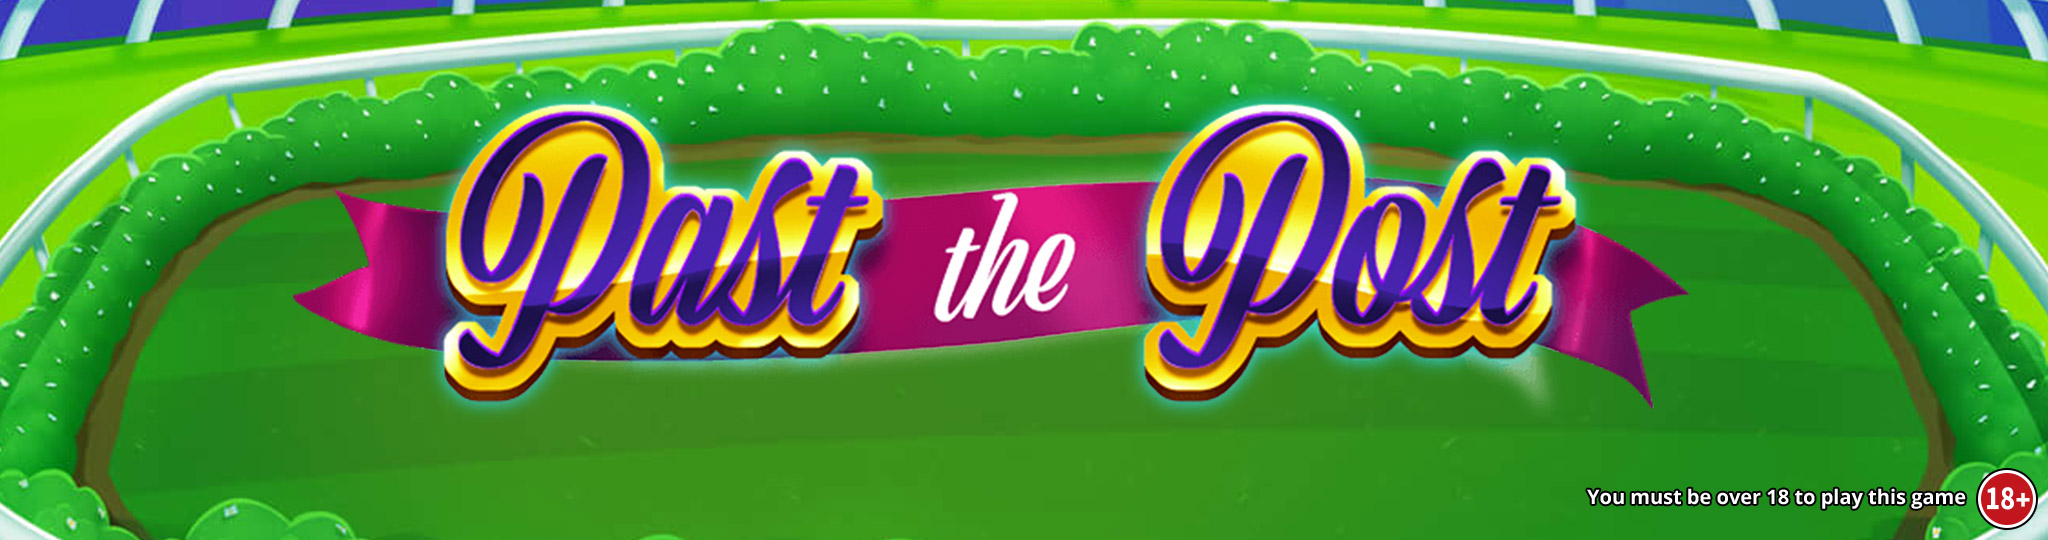 past the post slots game logo